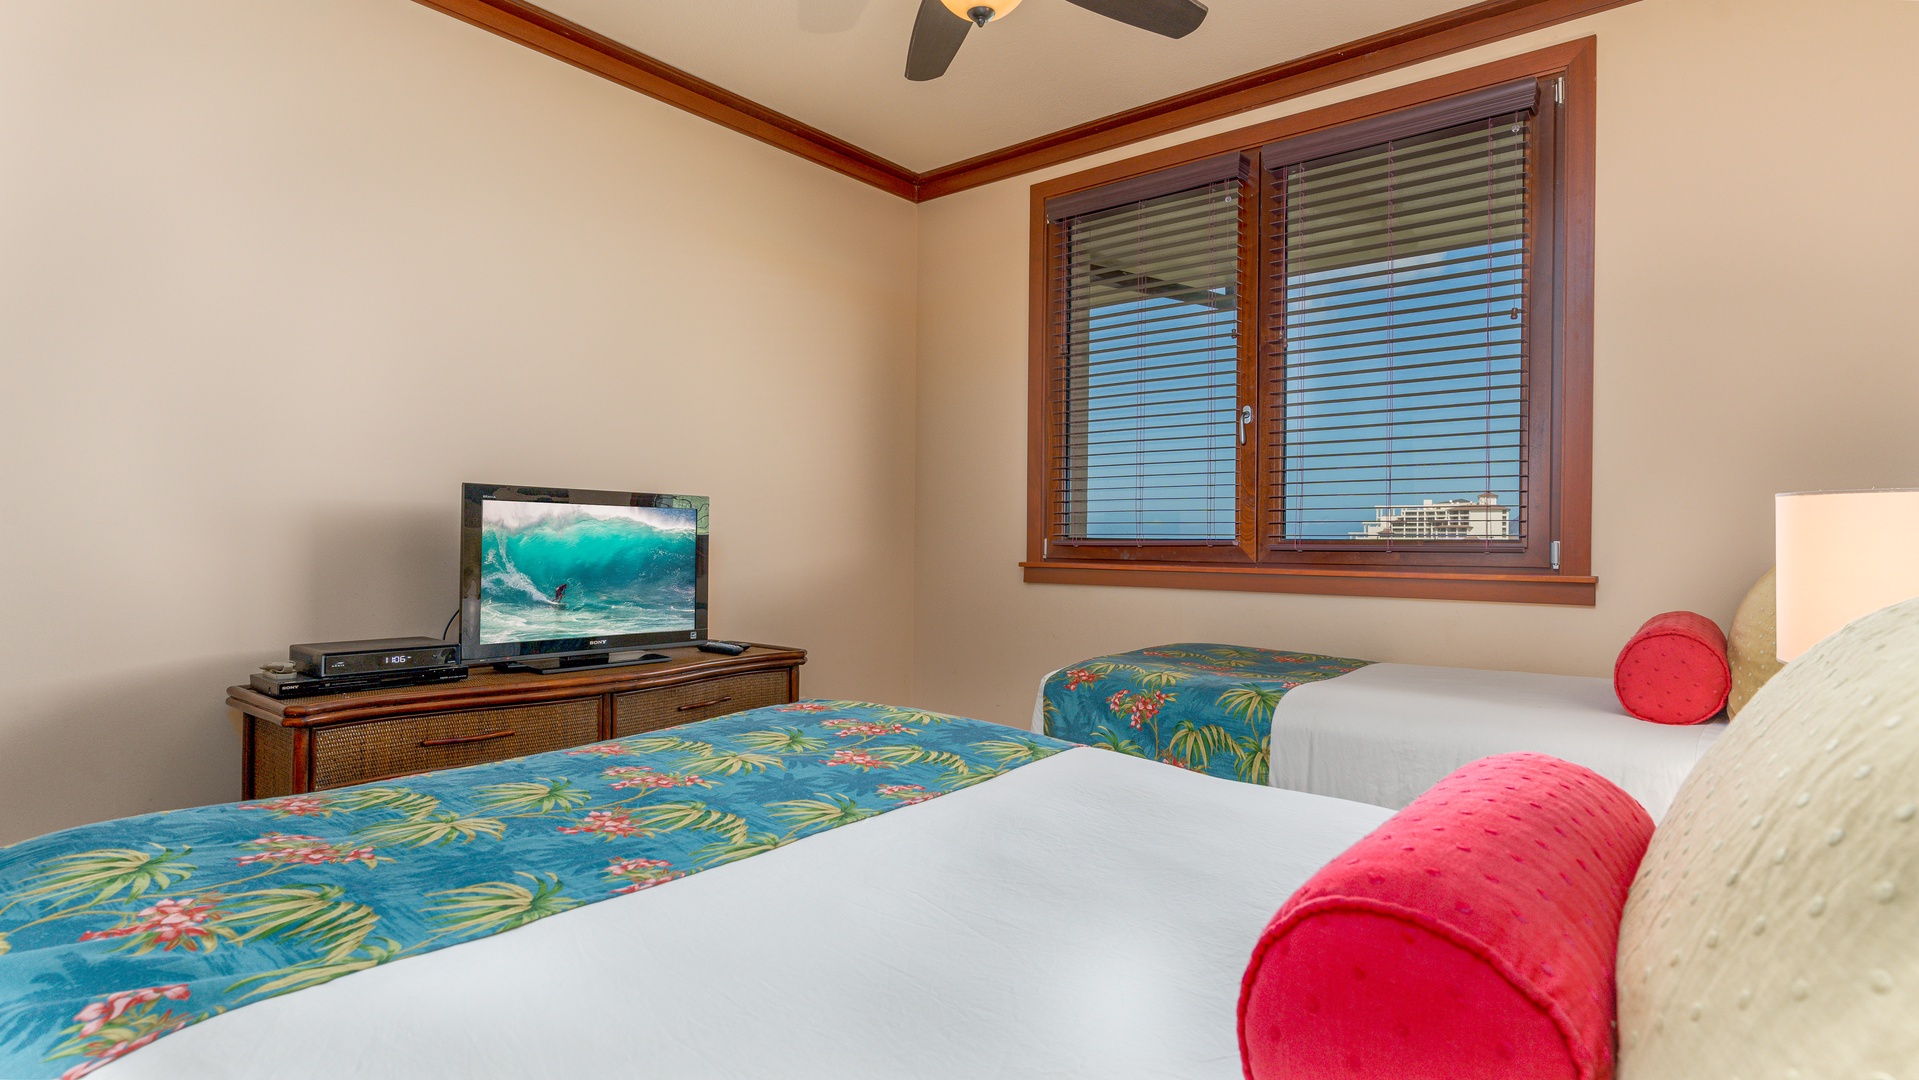 Kapolei Vacation Rentals, Ko Olina Beach Villas B1101 - The second guest bedroom features one queen and one twin bed and a TV.